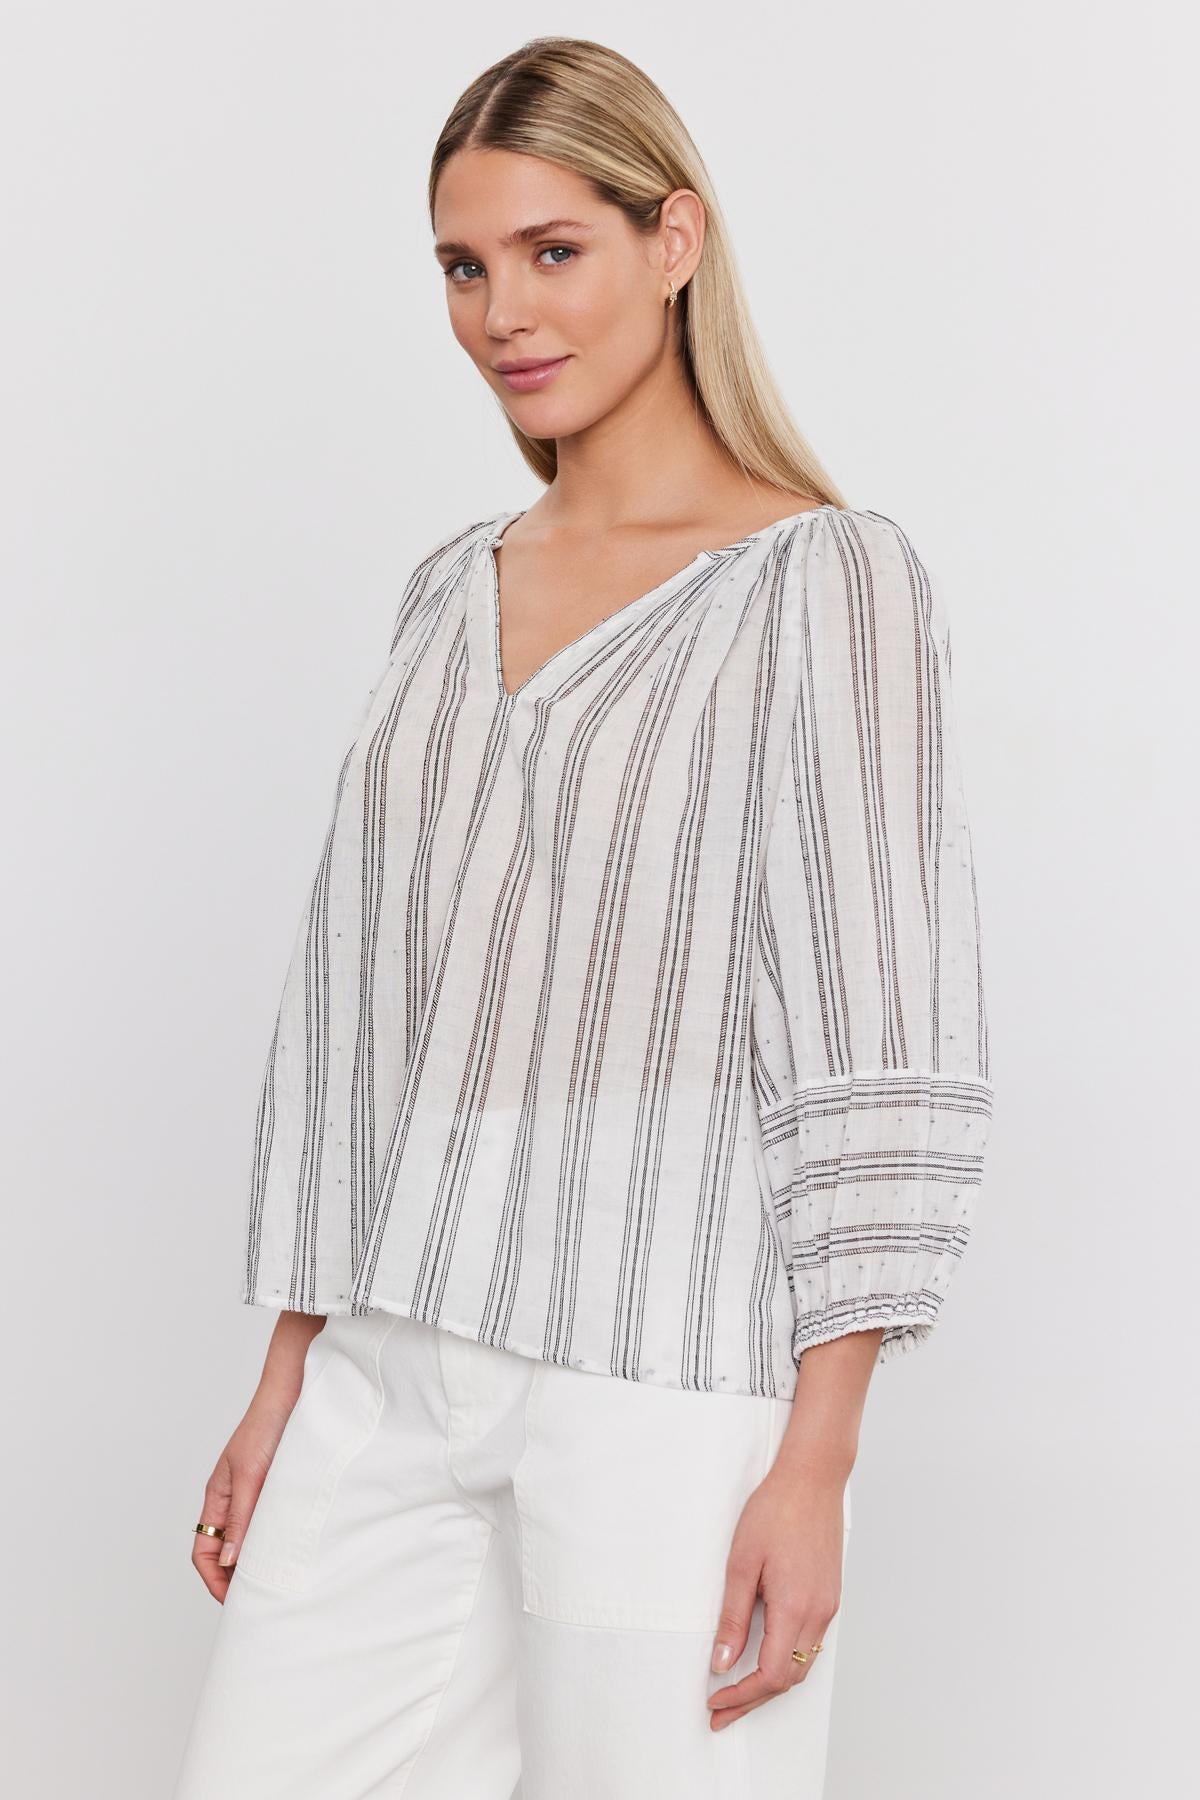   A woman models a white and grey striped cotton Gianna top with three-quarter sleeves and elastic cuffs, paired with white pants, against a plain background by Velvet by Graham & Spencer. 